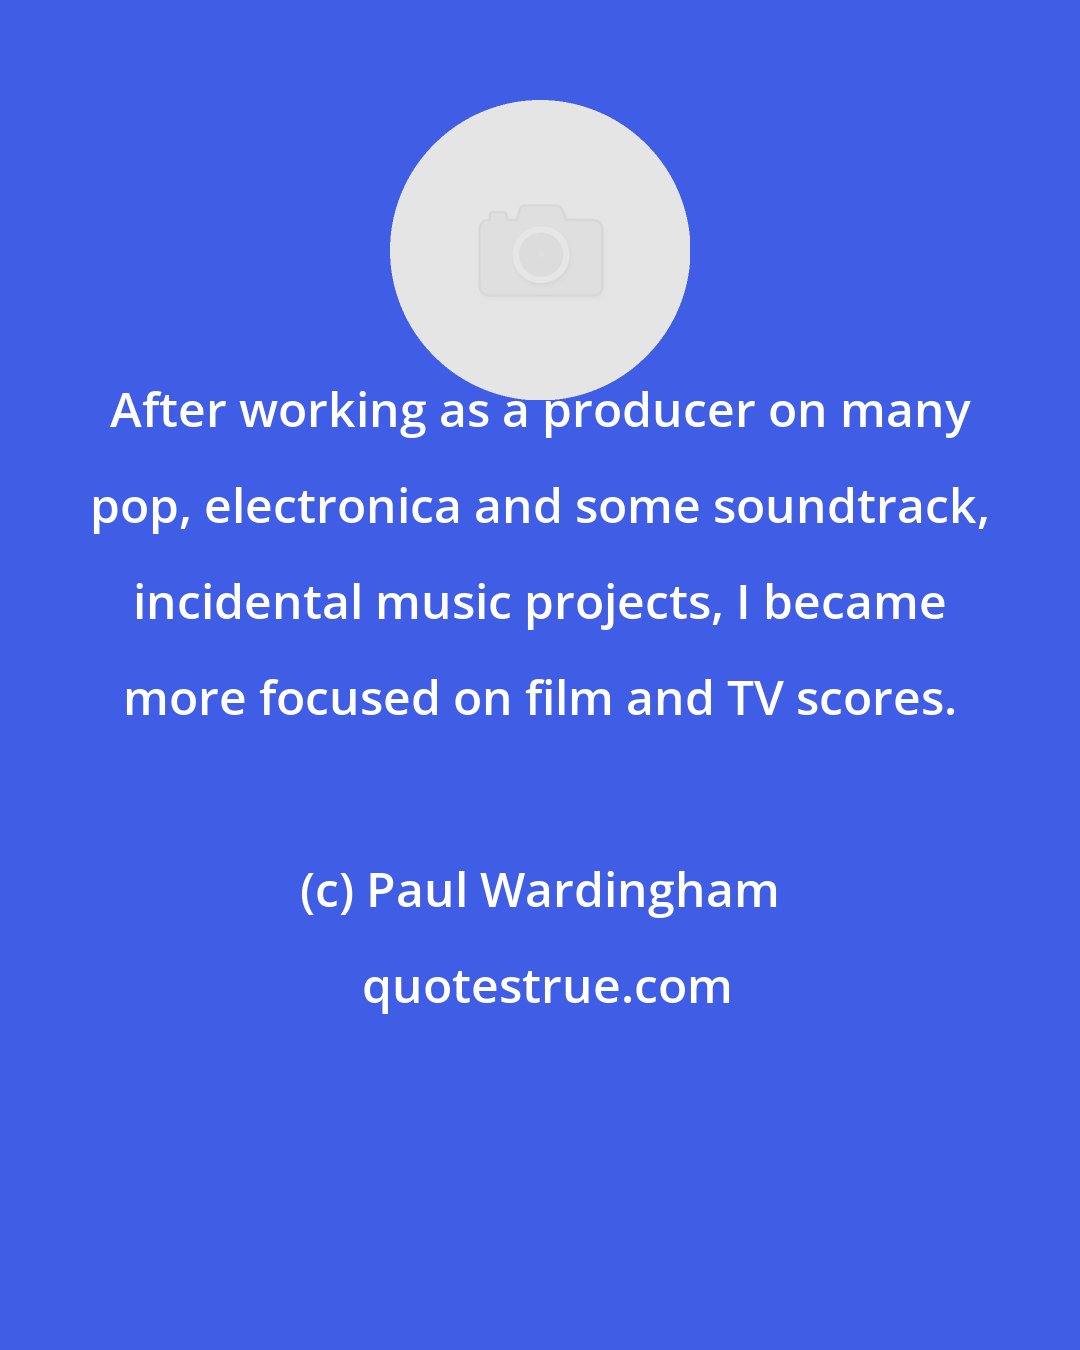 Paul Wardingham: After working as a producer on many pop, electronica and some soundtrack, incidental music projects, I became more focused on film and TV scores.